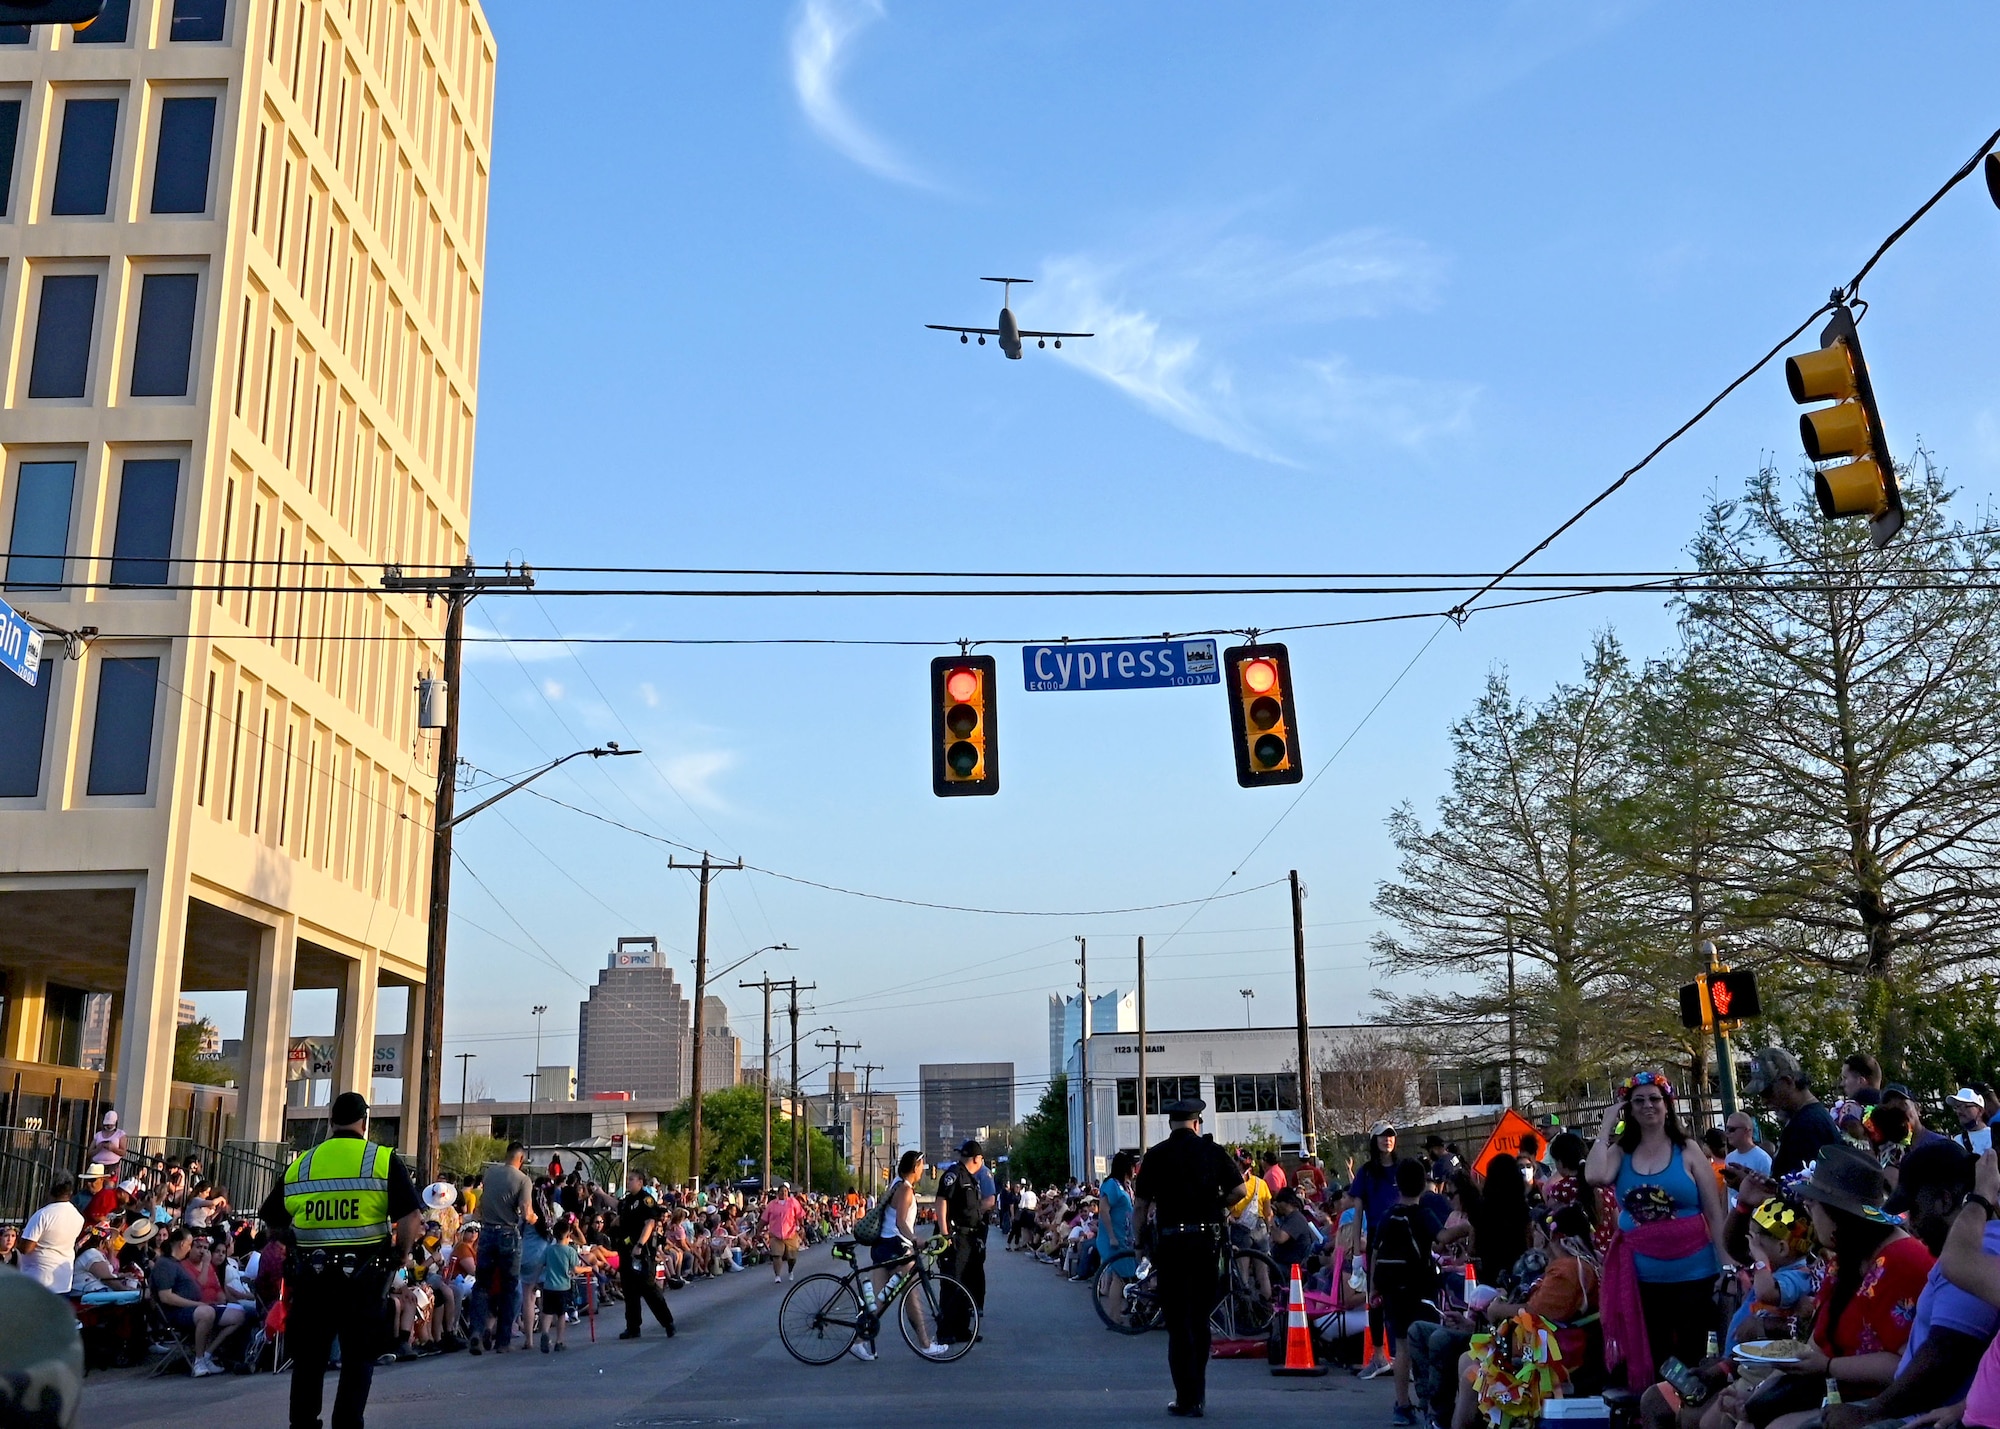 A 433rd Airlift Wing C-5M Super Galaxy aircraft flies over the Flambeau Parade route in downtown San Antonio to celebrate Fiesta, April 9, 2022. The flyover kicked-off the parade, where four South Texas Reserve units collaborated for the first time to enter a float together. (U.S. Air Force photo by Master Sgt. Samantha Mathison)